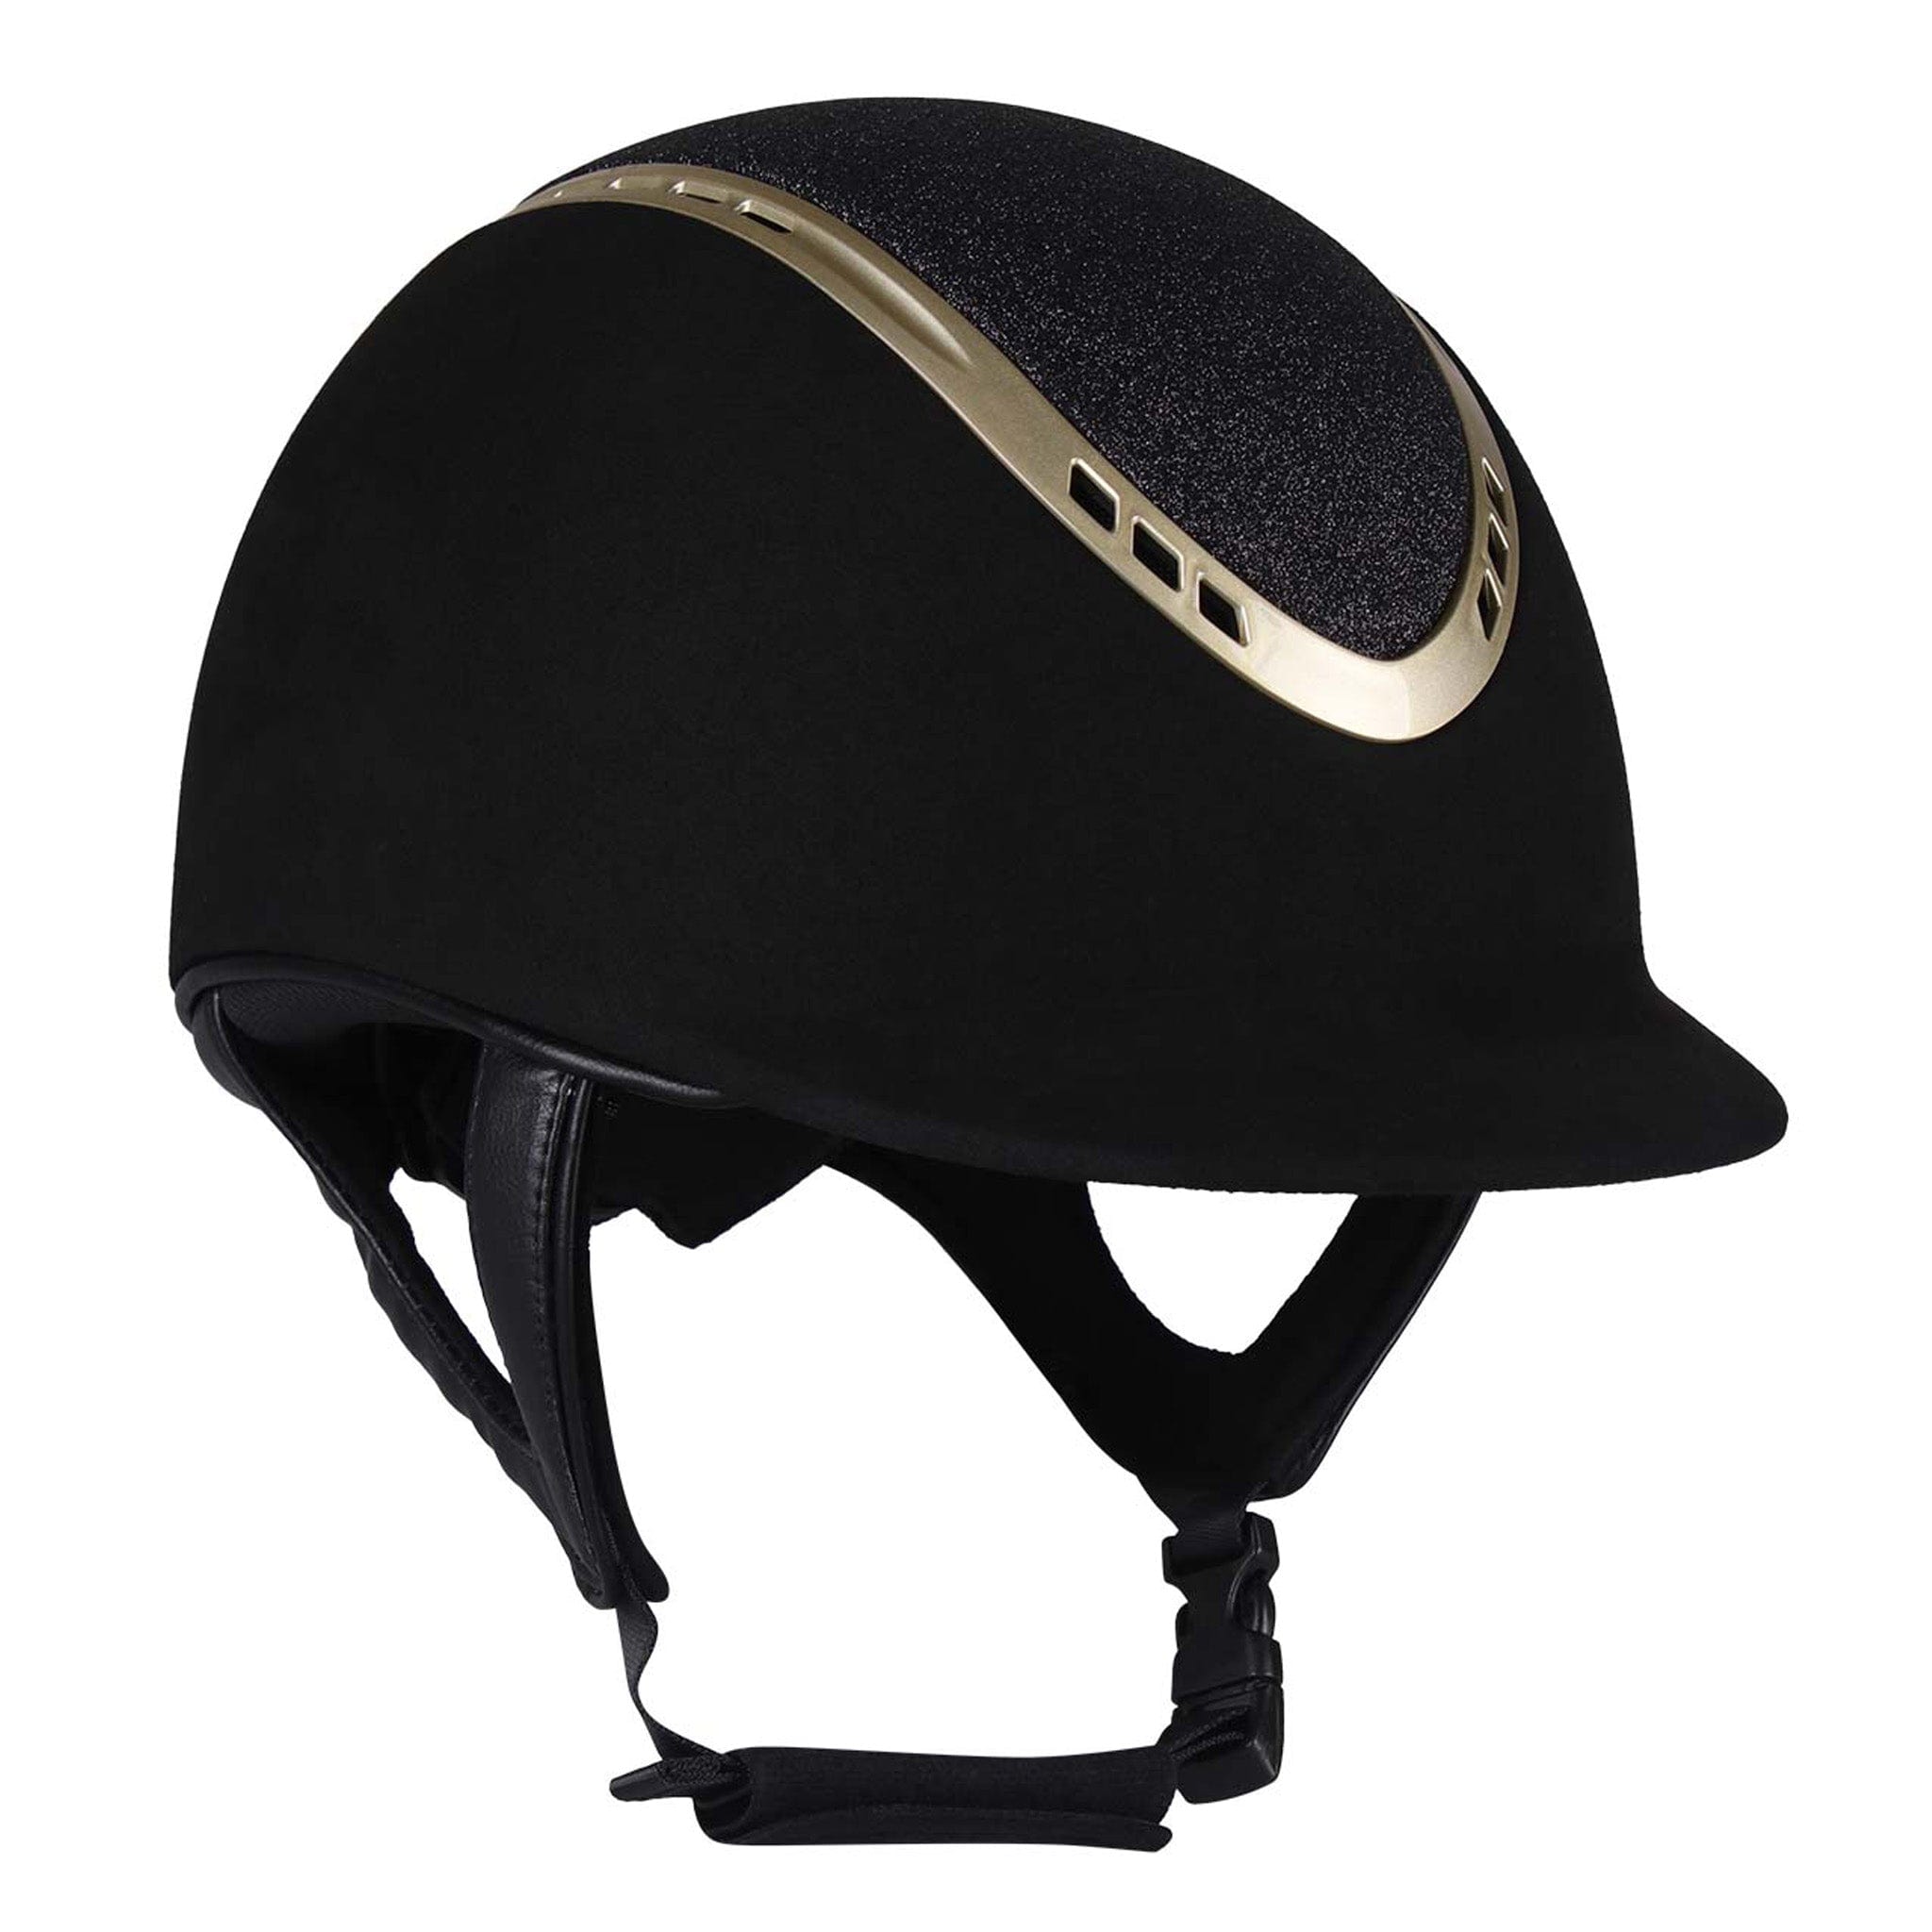 Size 7 Riding Hats, Free UK Delivery Available at EQUUS